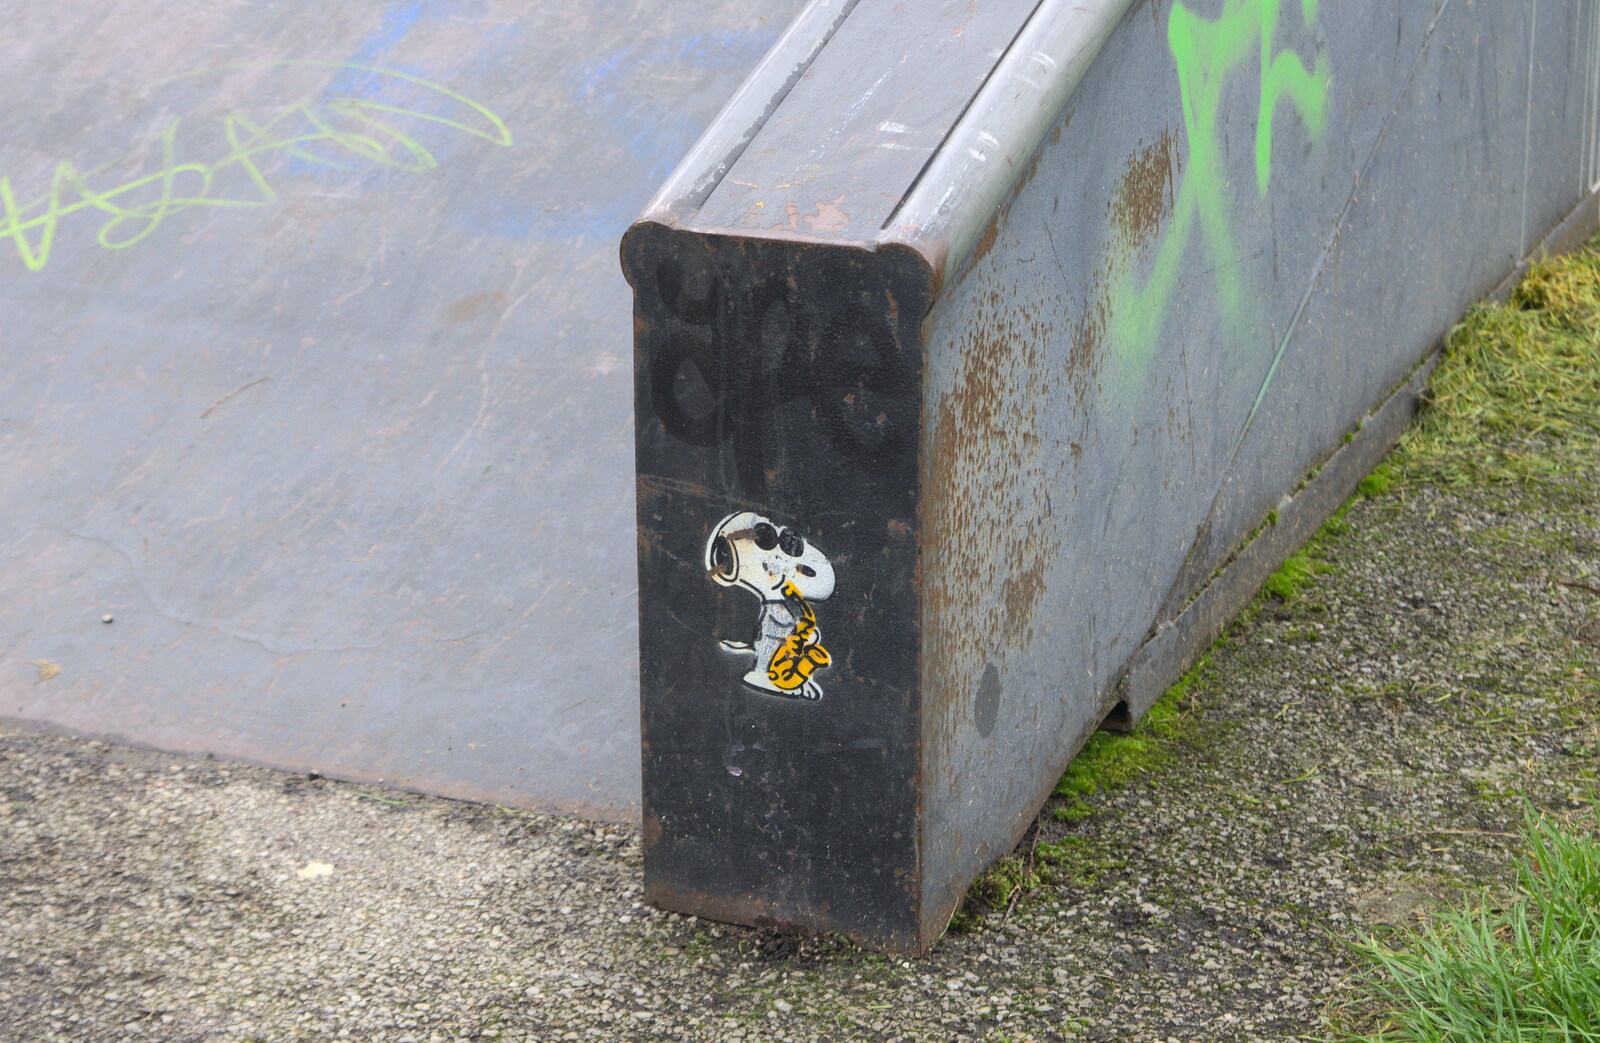 Snoopy graffiti on a skate ramp from Skate Parks and Orange Skies, Brome and Eye, Suffolk - 10th October 2017